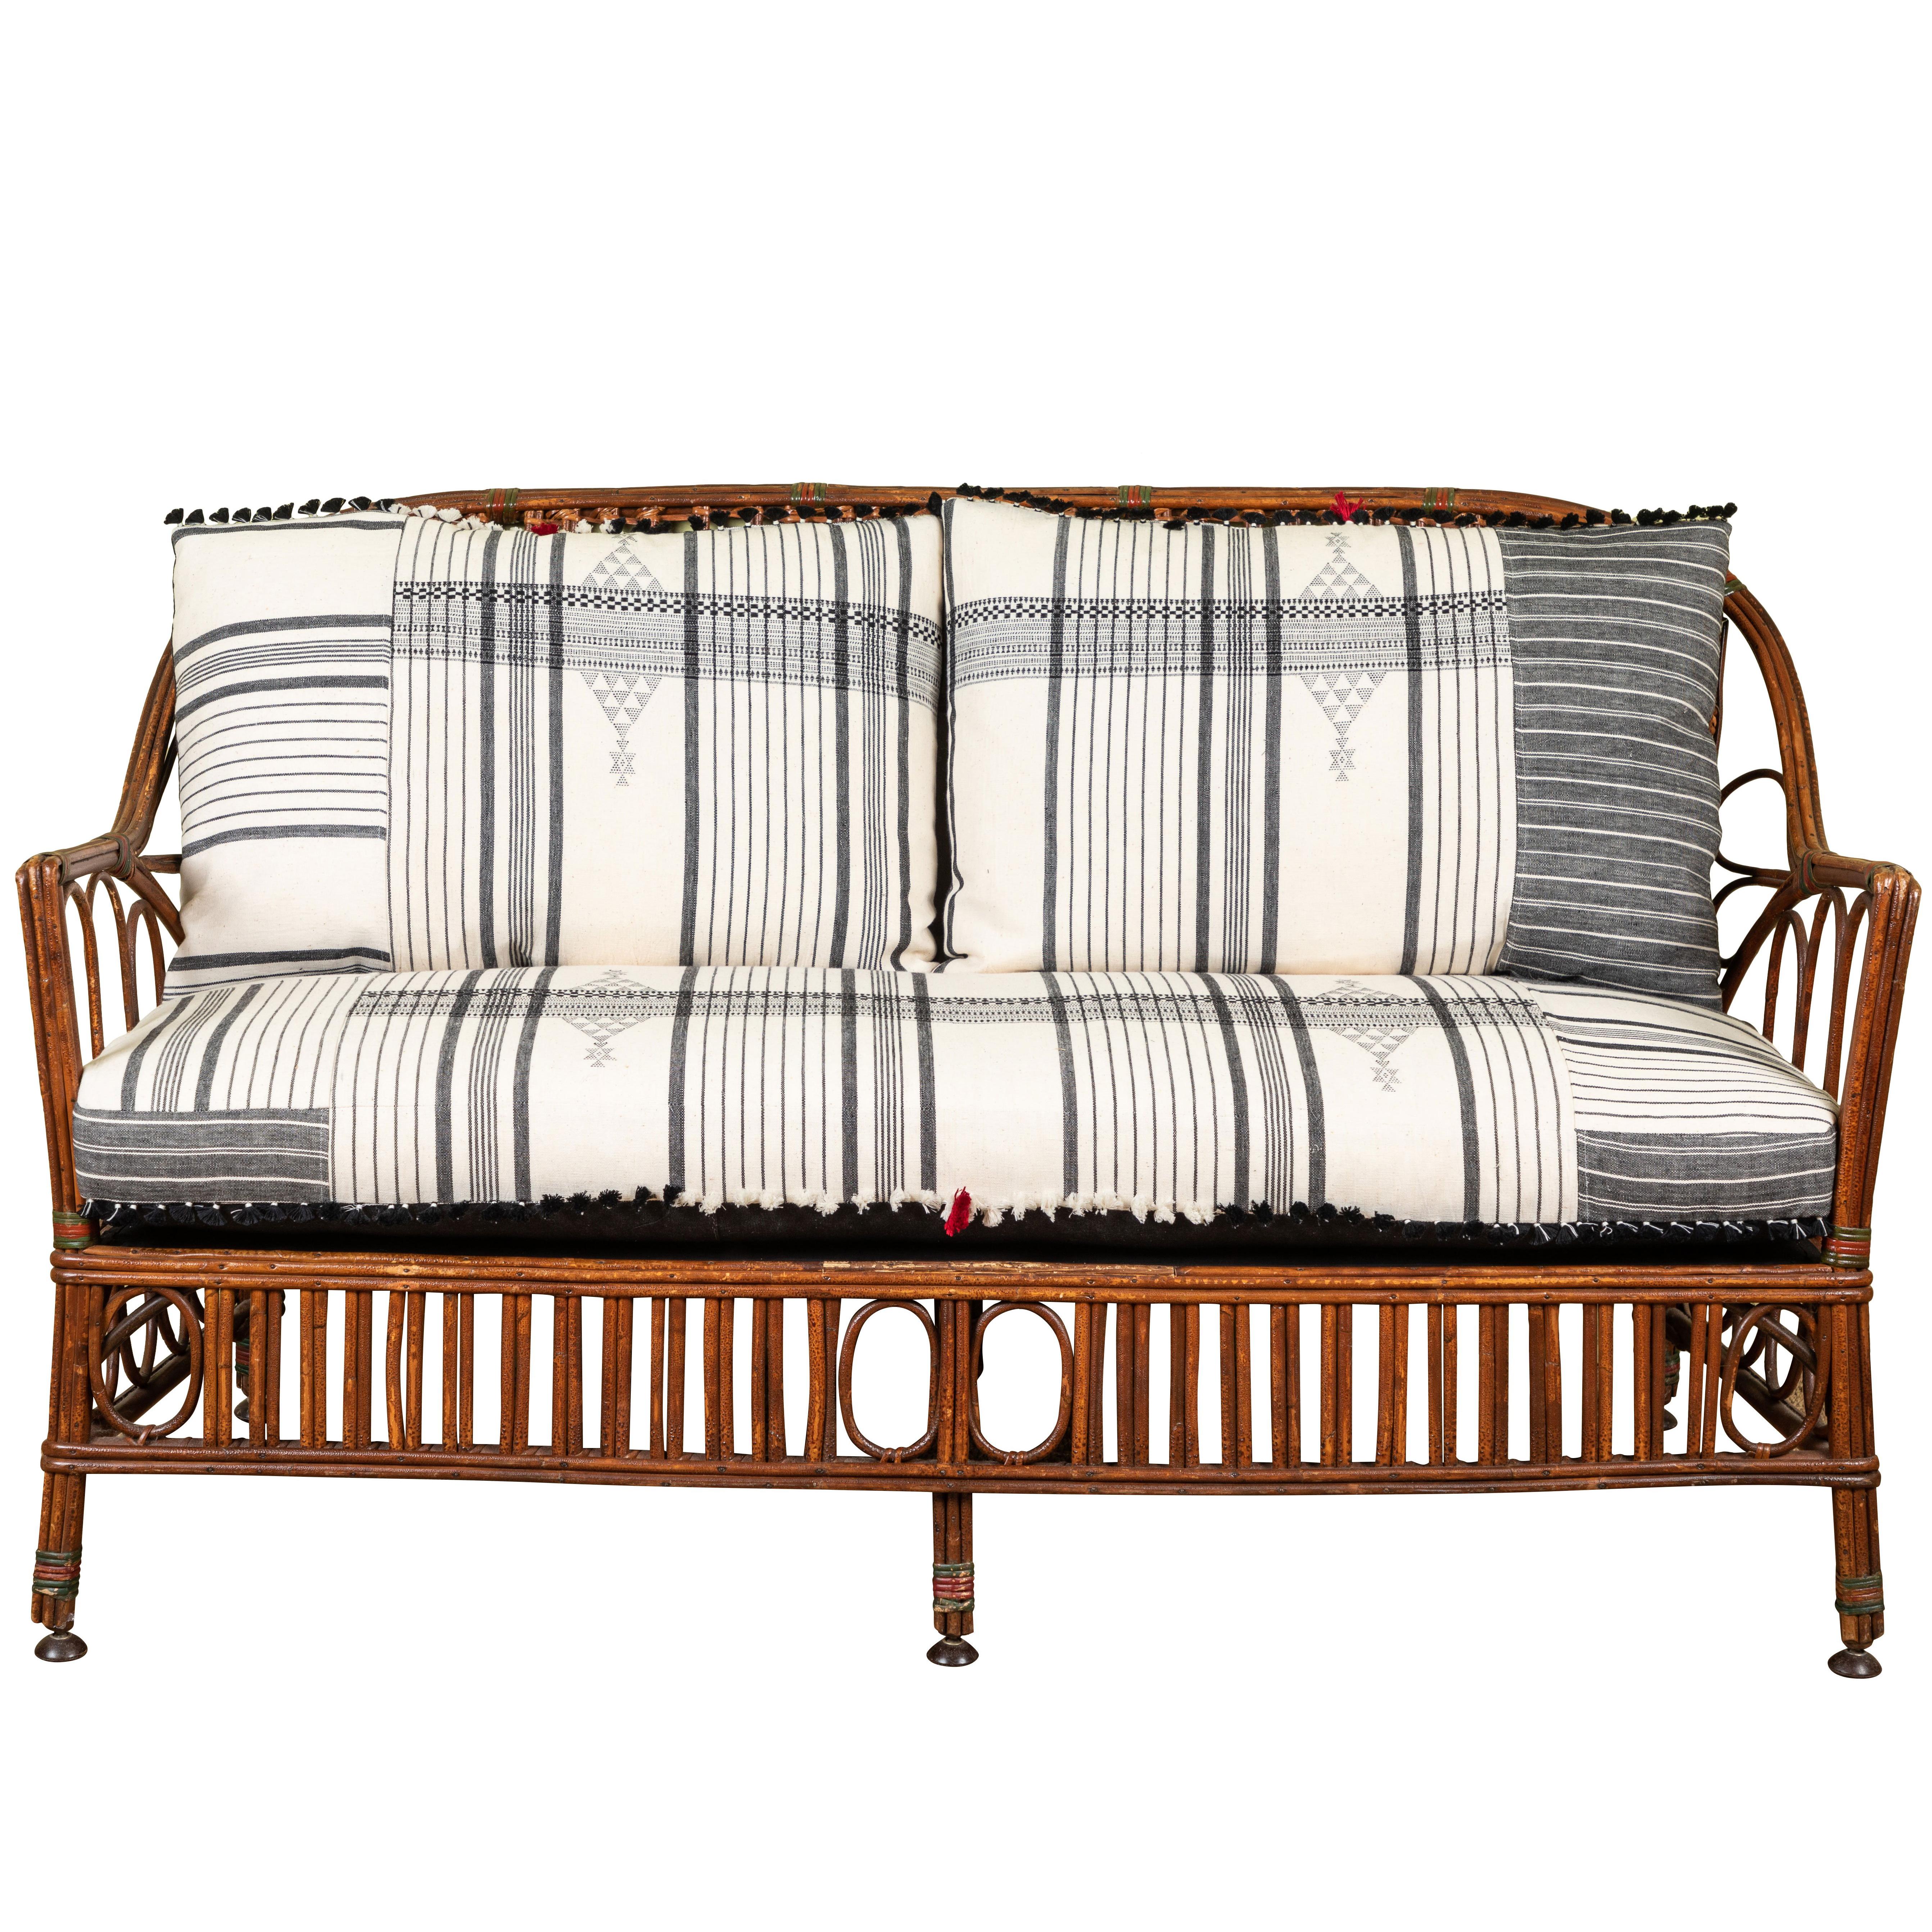 1920s Bent Wood Settee with Injiri Upholstery For Sale